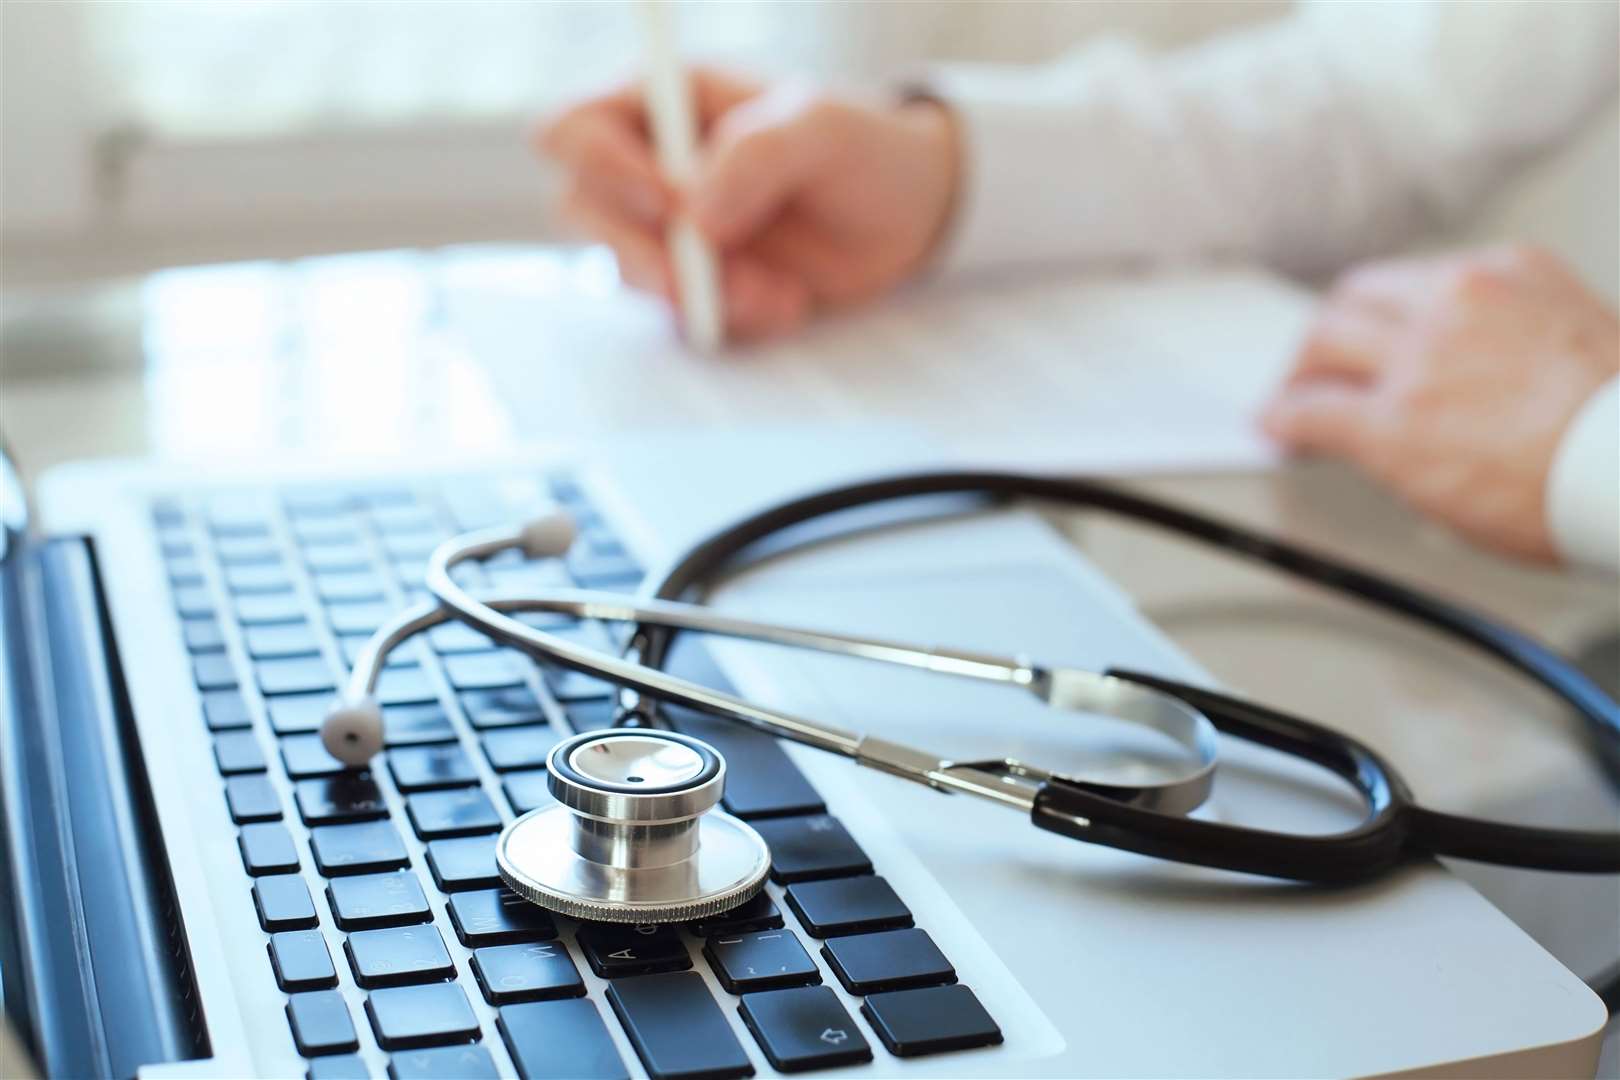 A doctor will triage the appointment on the basis of the information provided online